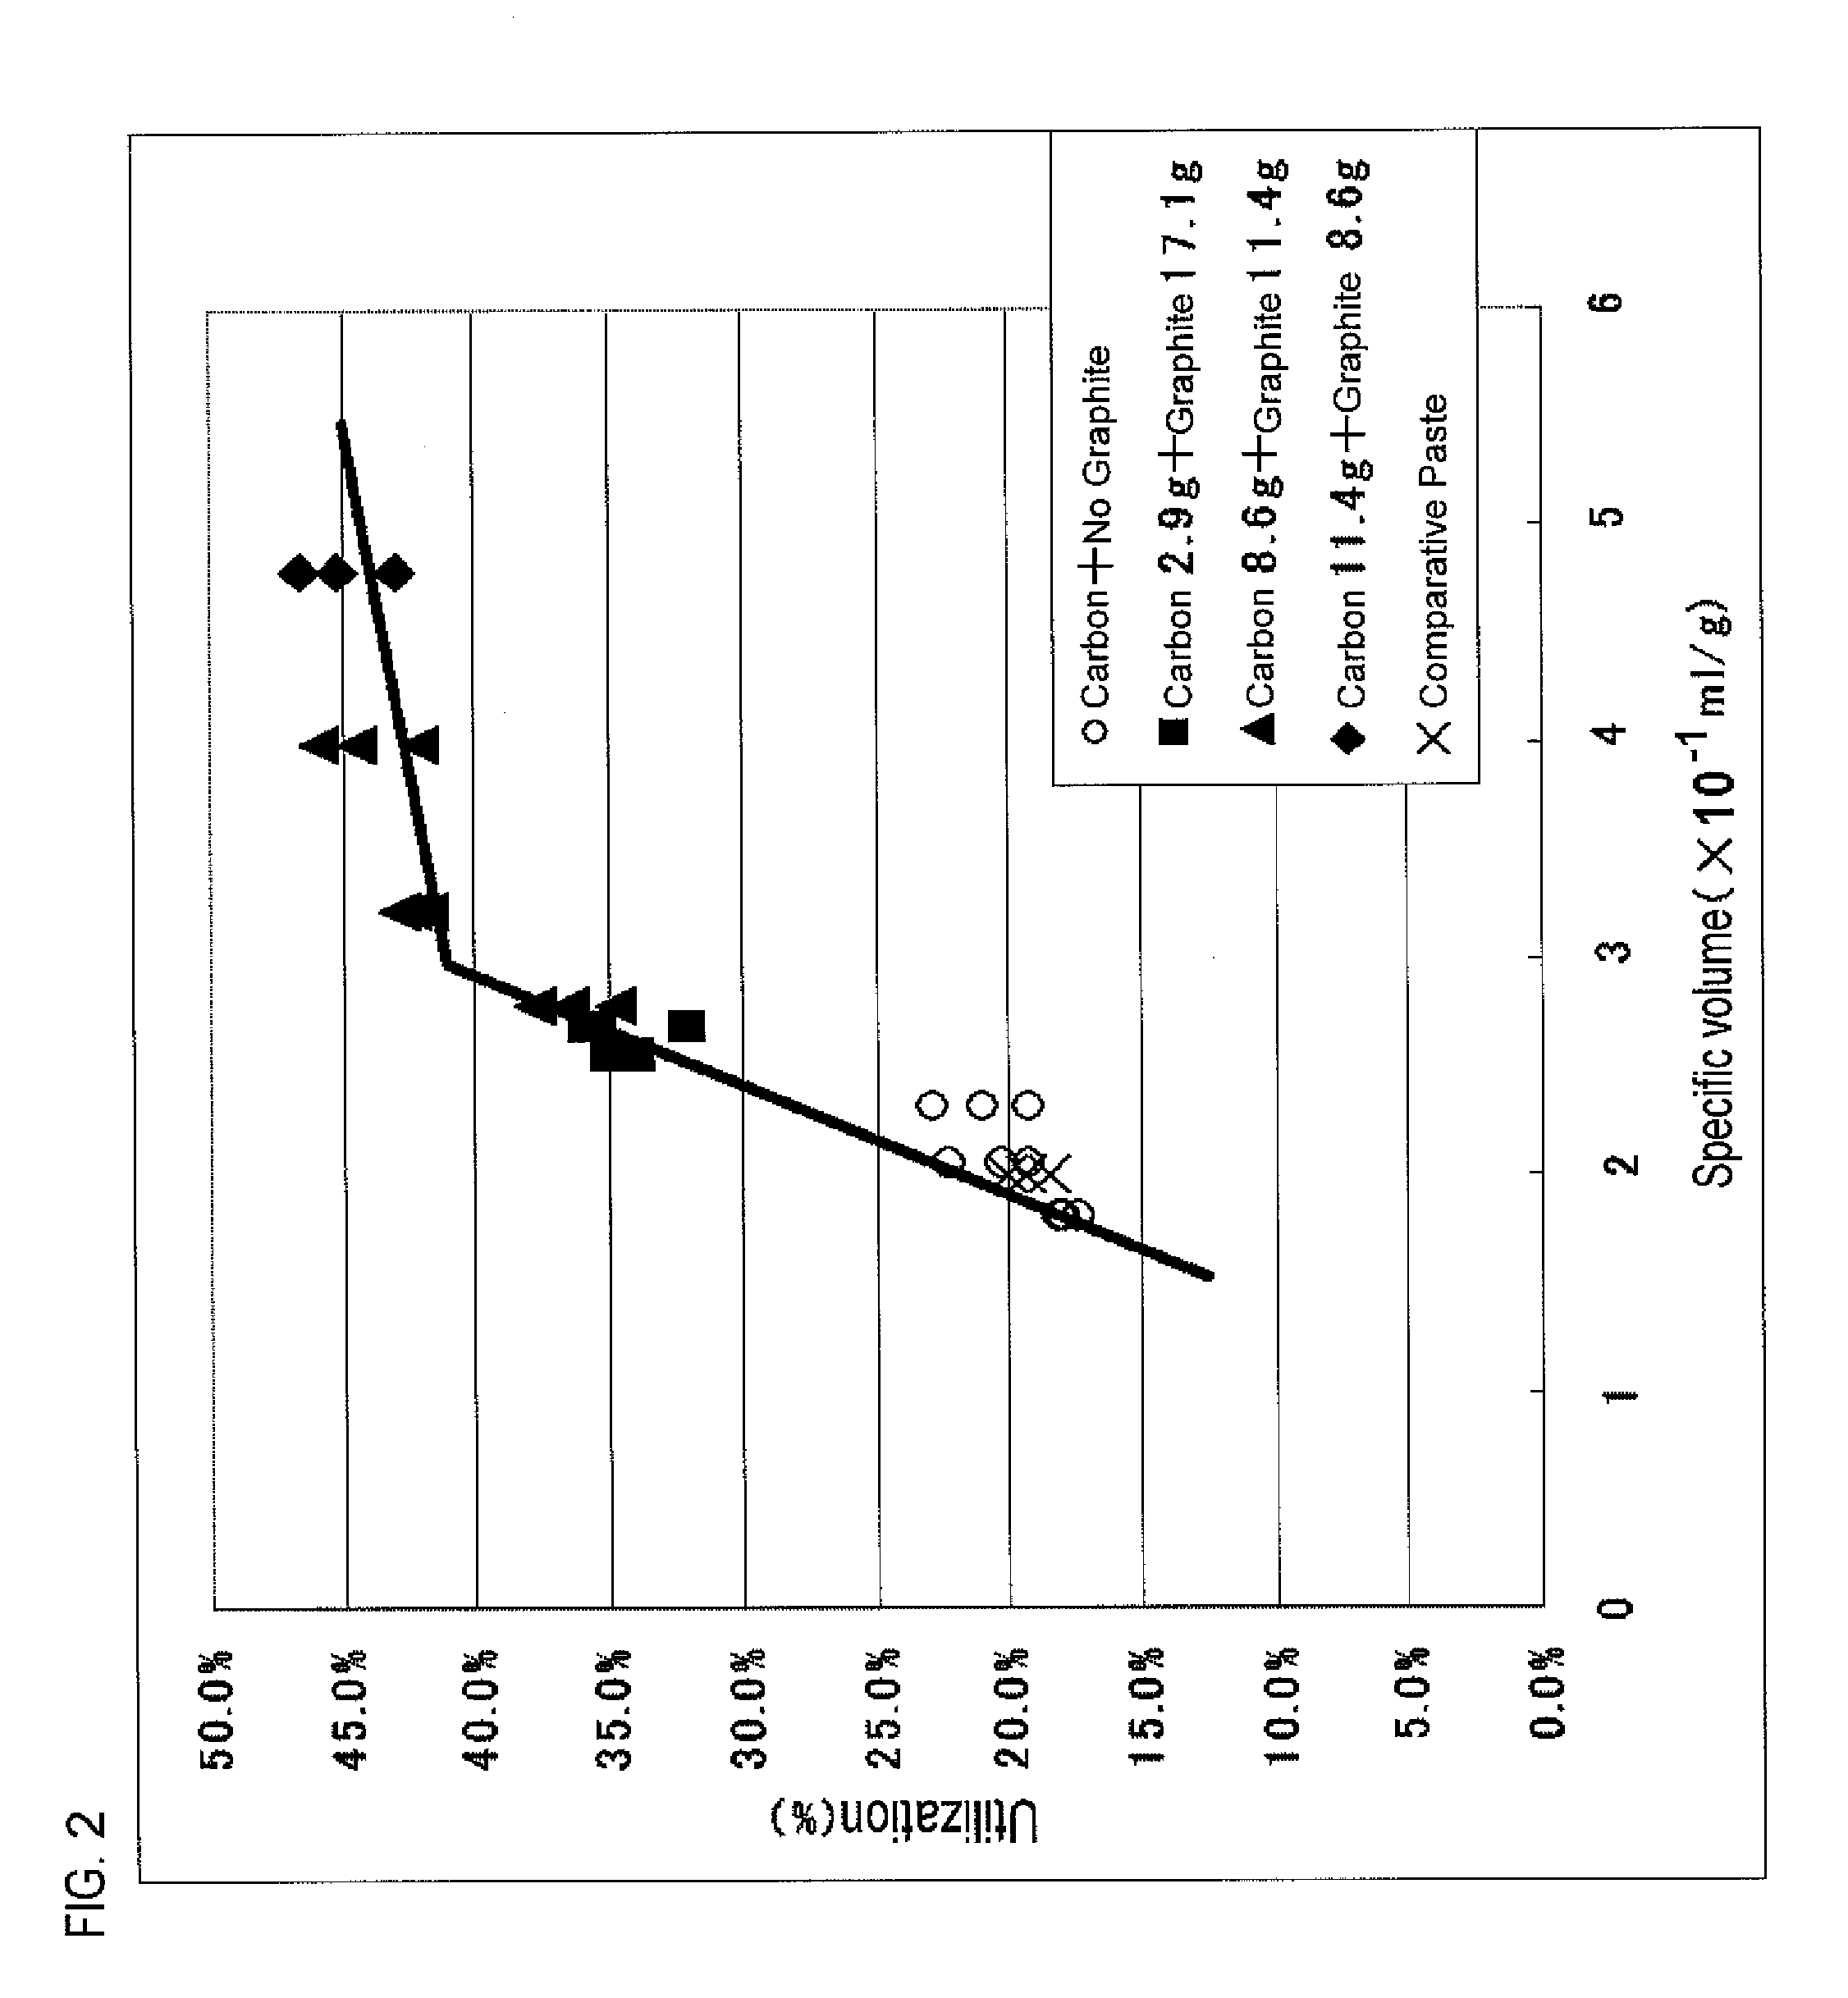 Negative-electrode active material for secondary battery